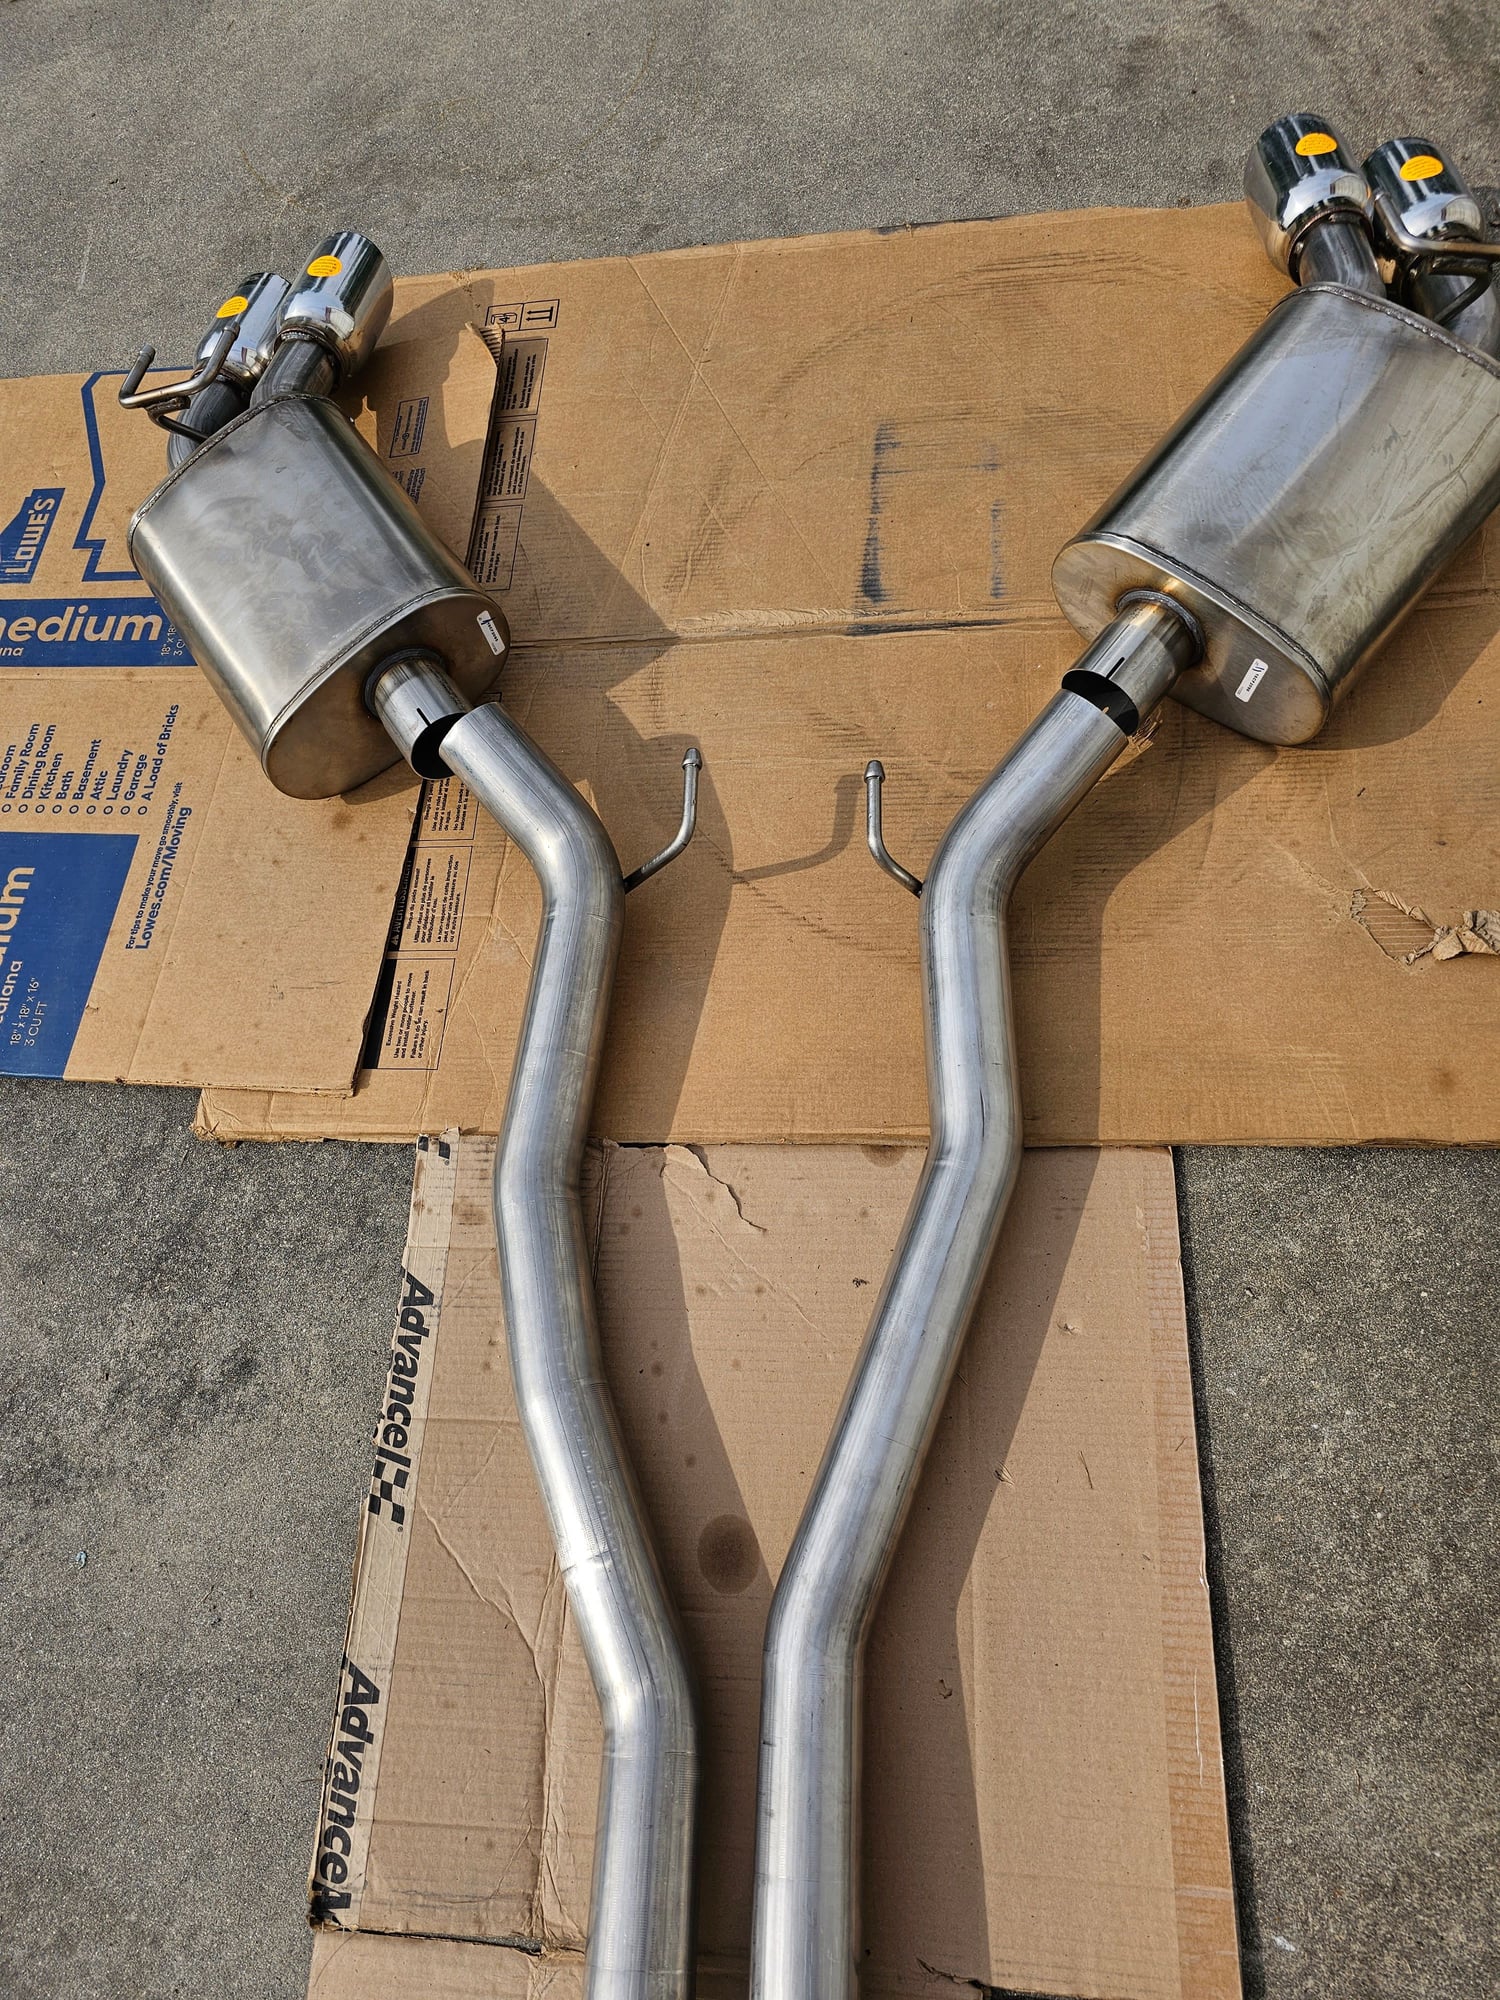 Engine - Exhaust - Full corsa #14971  3" stainless sport exhaust system - New - 2010 to 2015 Chevrolet Camaro - Bowman, SC 29018, United States